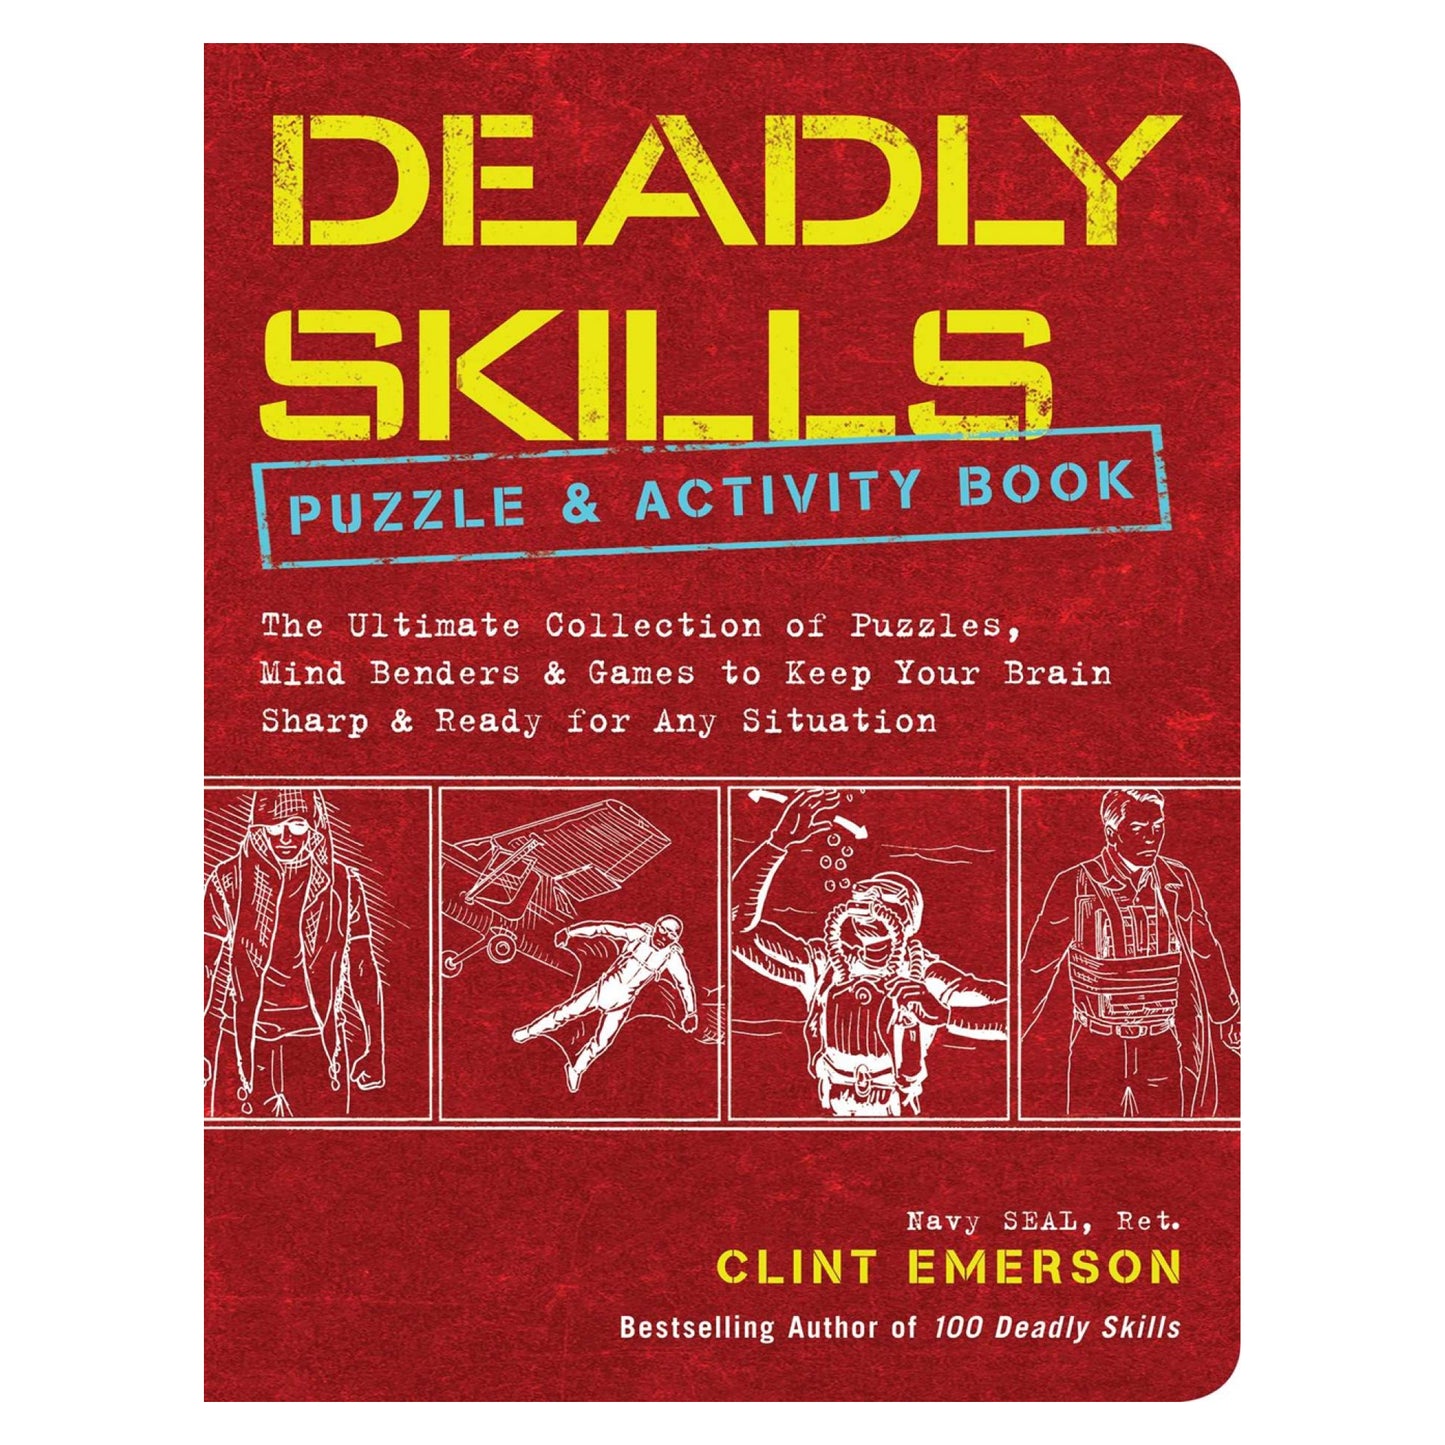 Deadly Skills Puzzle & Activity Book